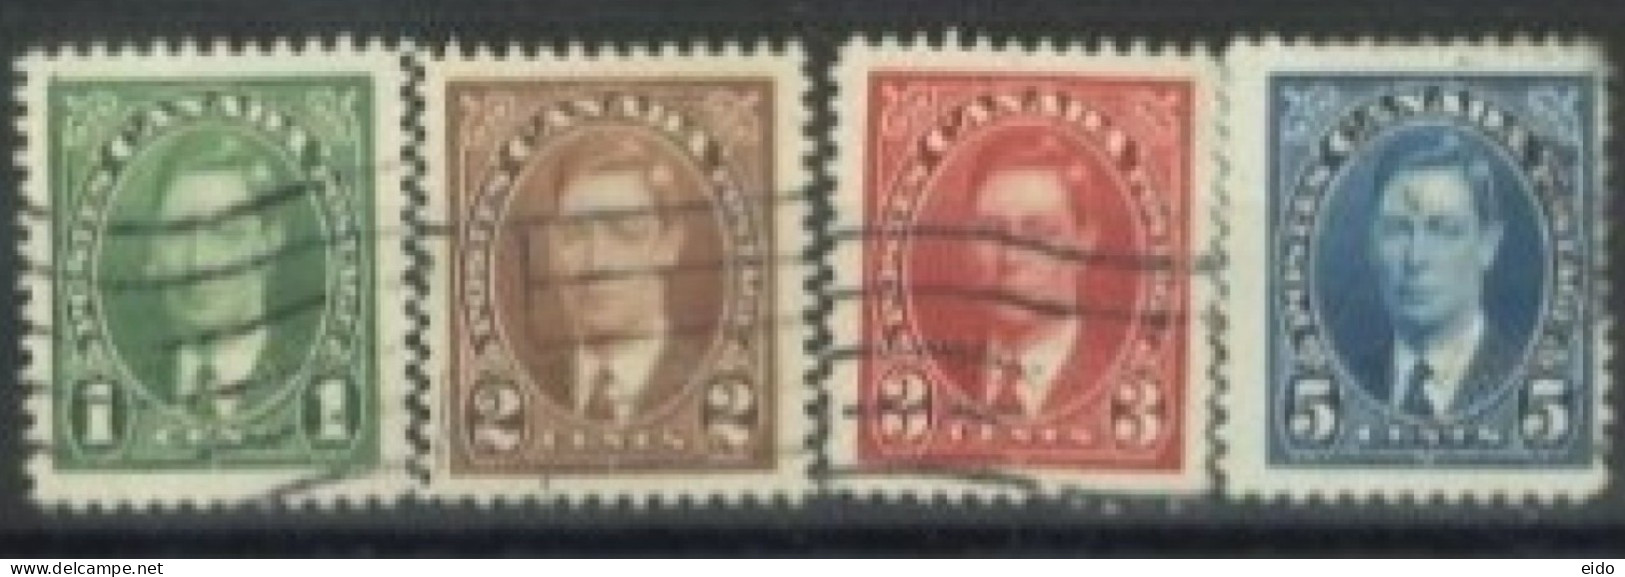 CANADA - 1937, KING GEORGE VI STAMPS SET OF 4, USED. - Oblitérés